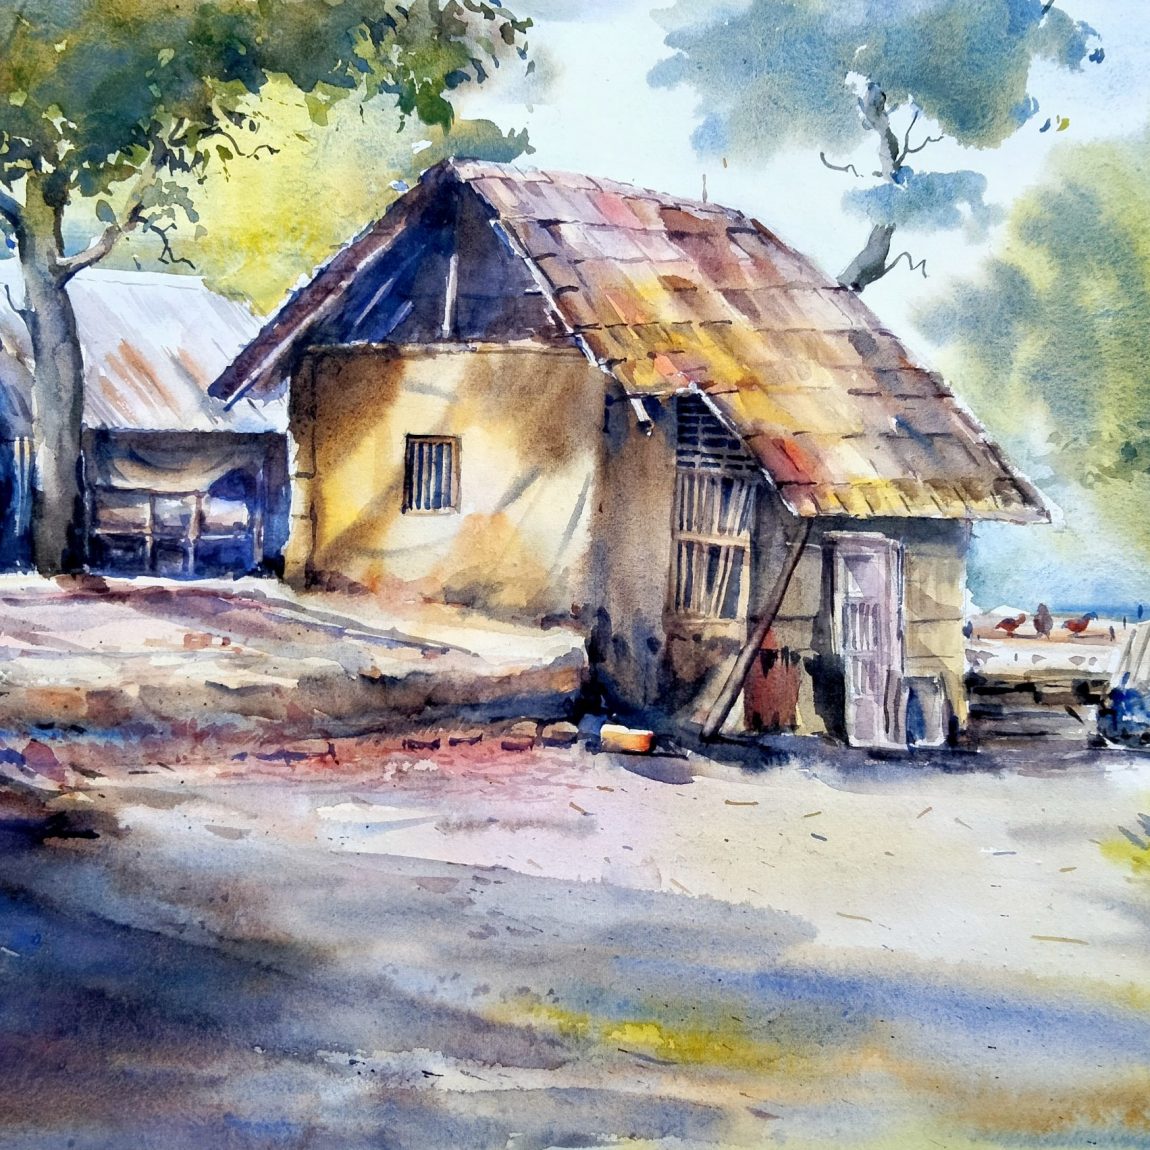 MD SAİFULLAH ABİR - Tittle: Hanging house
Size:8×12 cm
Media: watercolour on paper